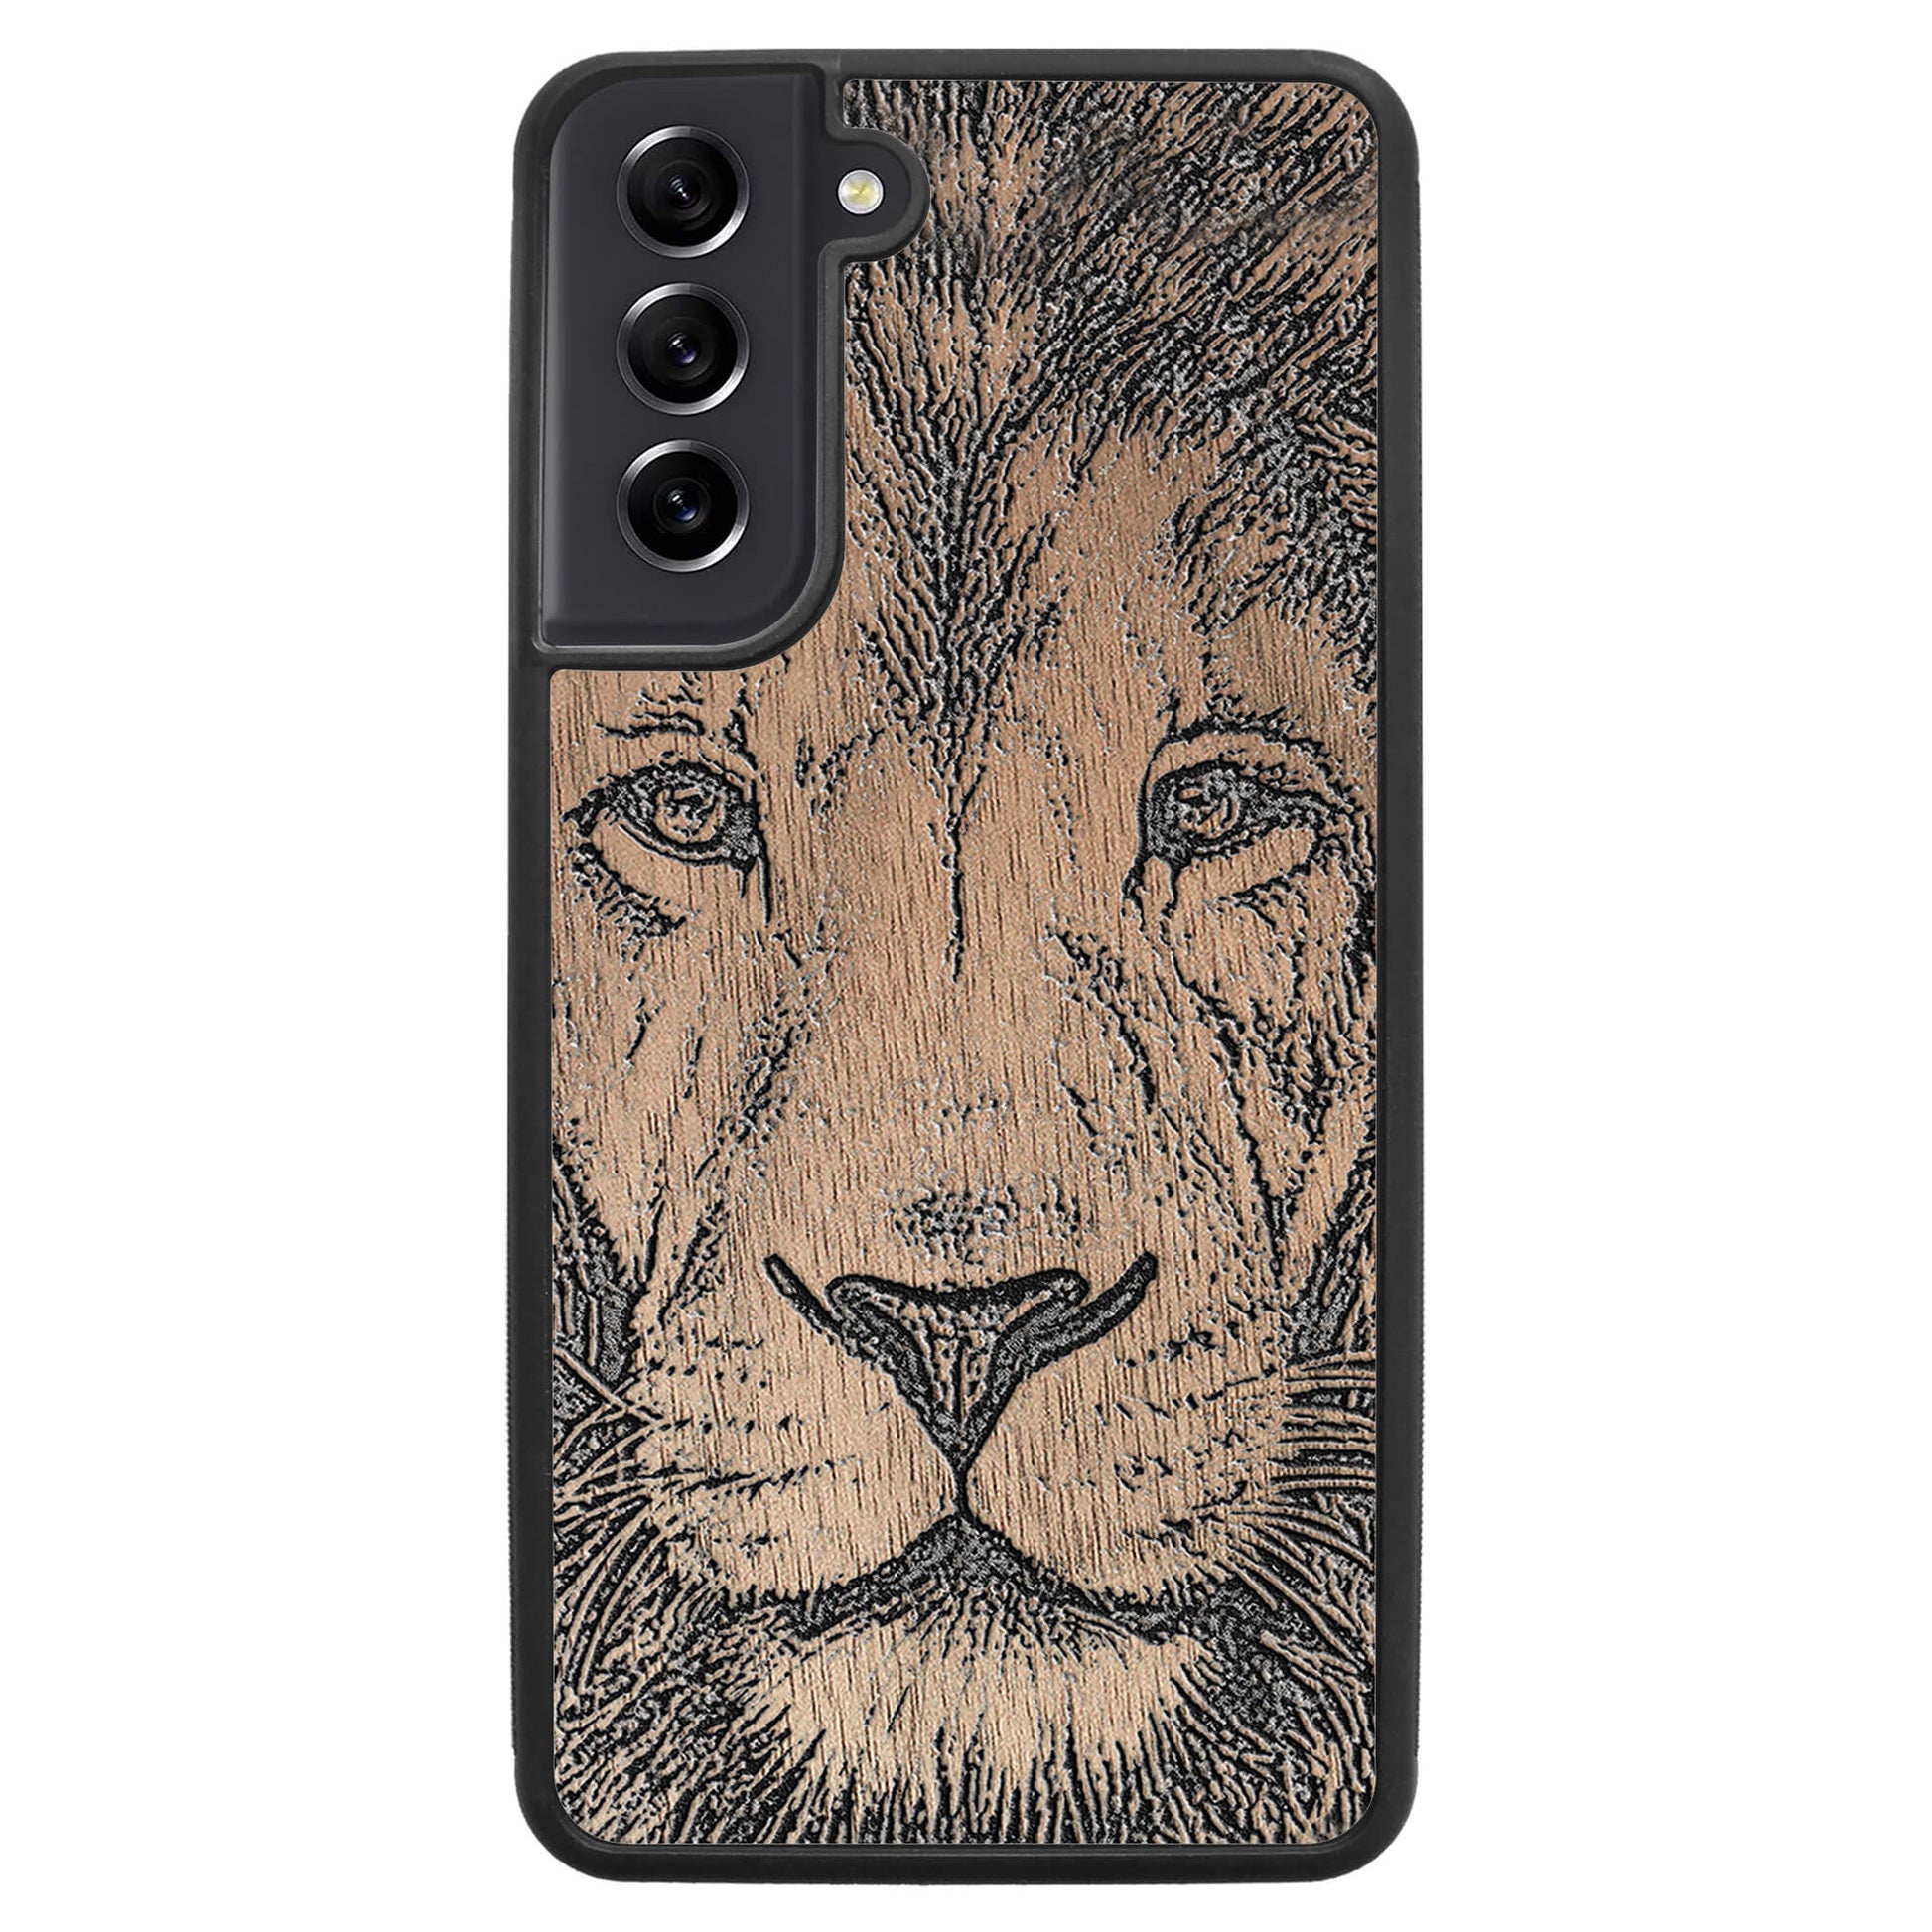 Wooden Case for Samsung Galaxy S21 FE Lion face